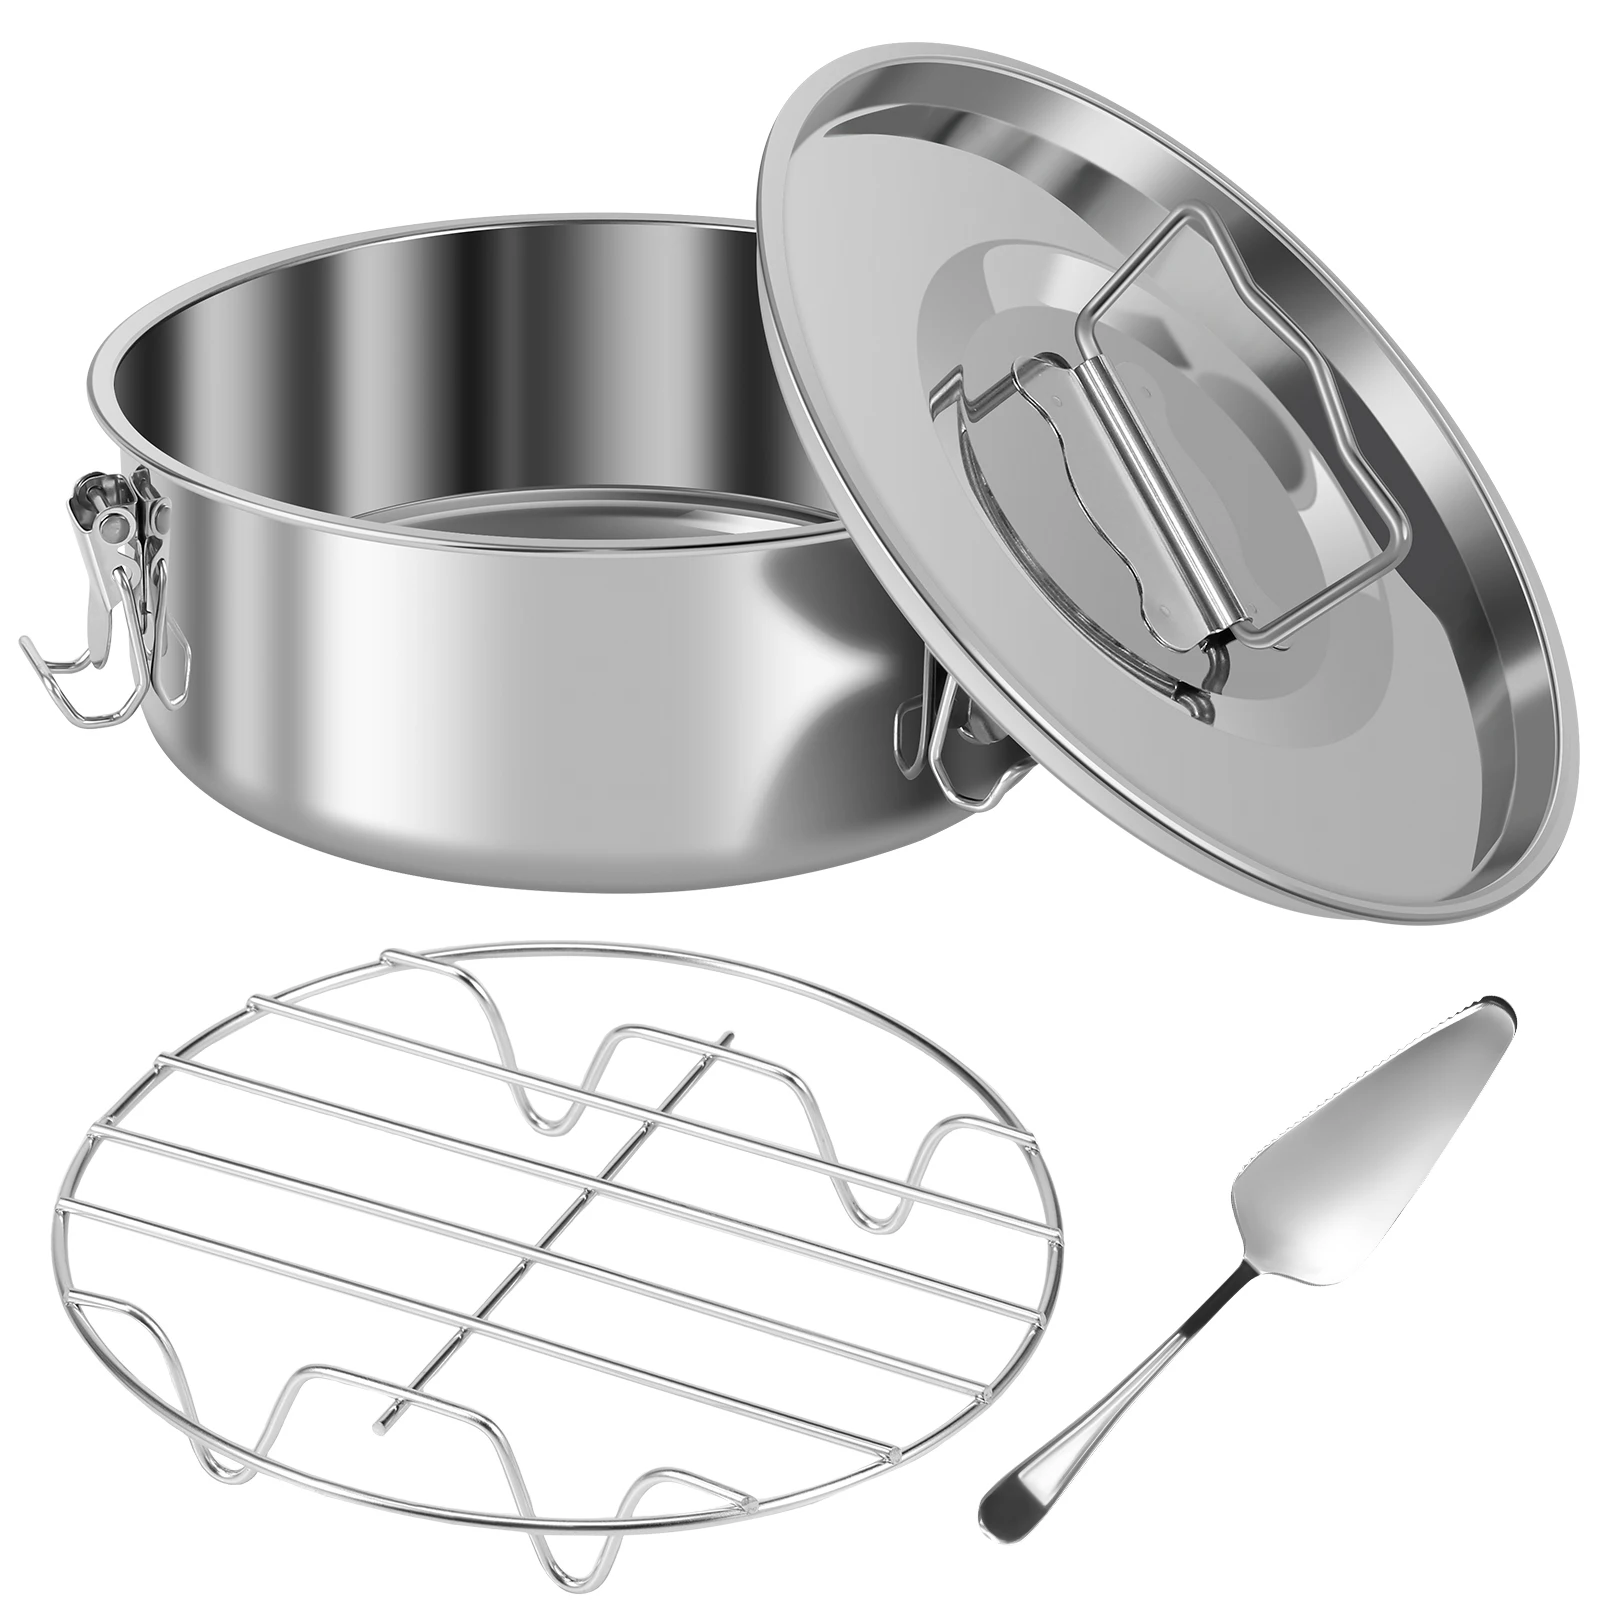 

Stainless Steel Flan Pan with Lid 1.5QT Flan Maker with Handle 7.5×7.5×3 Inch Flan Mold with Steam Rack and Cake Spatula